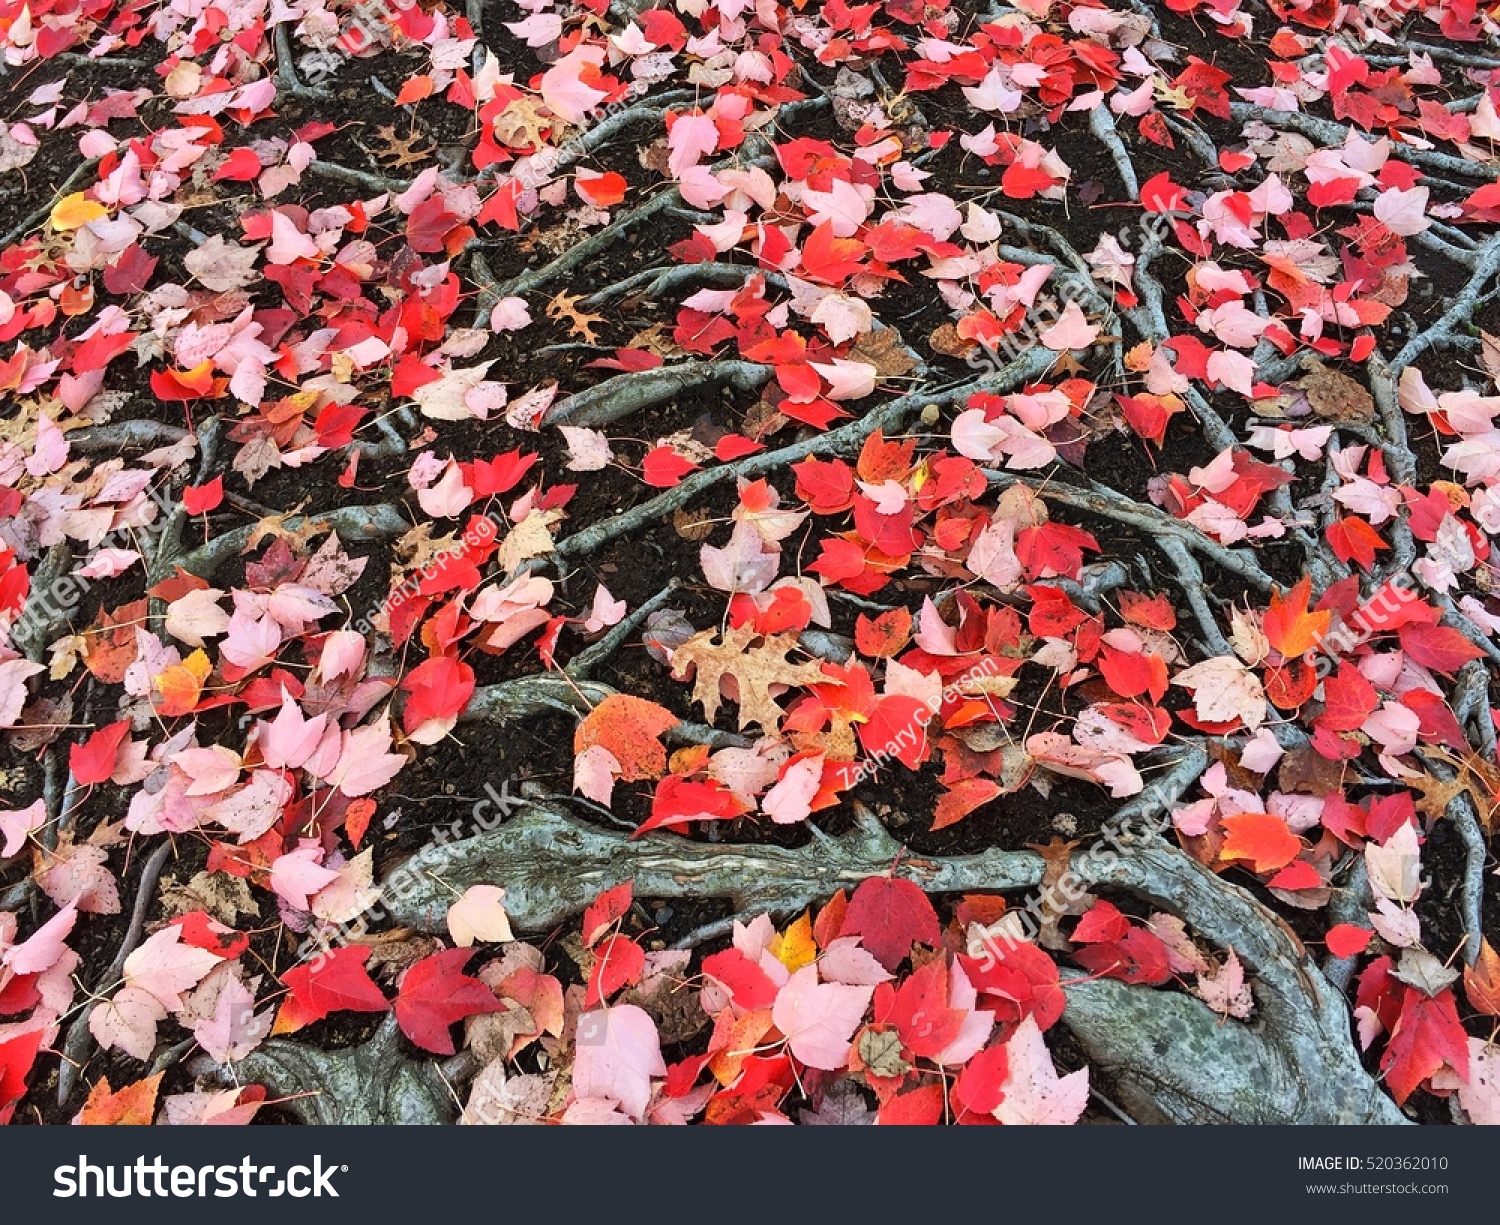 Colorful dry fall leaves on the ground #520362010